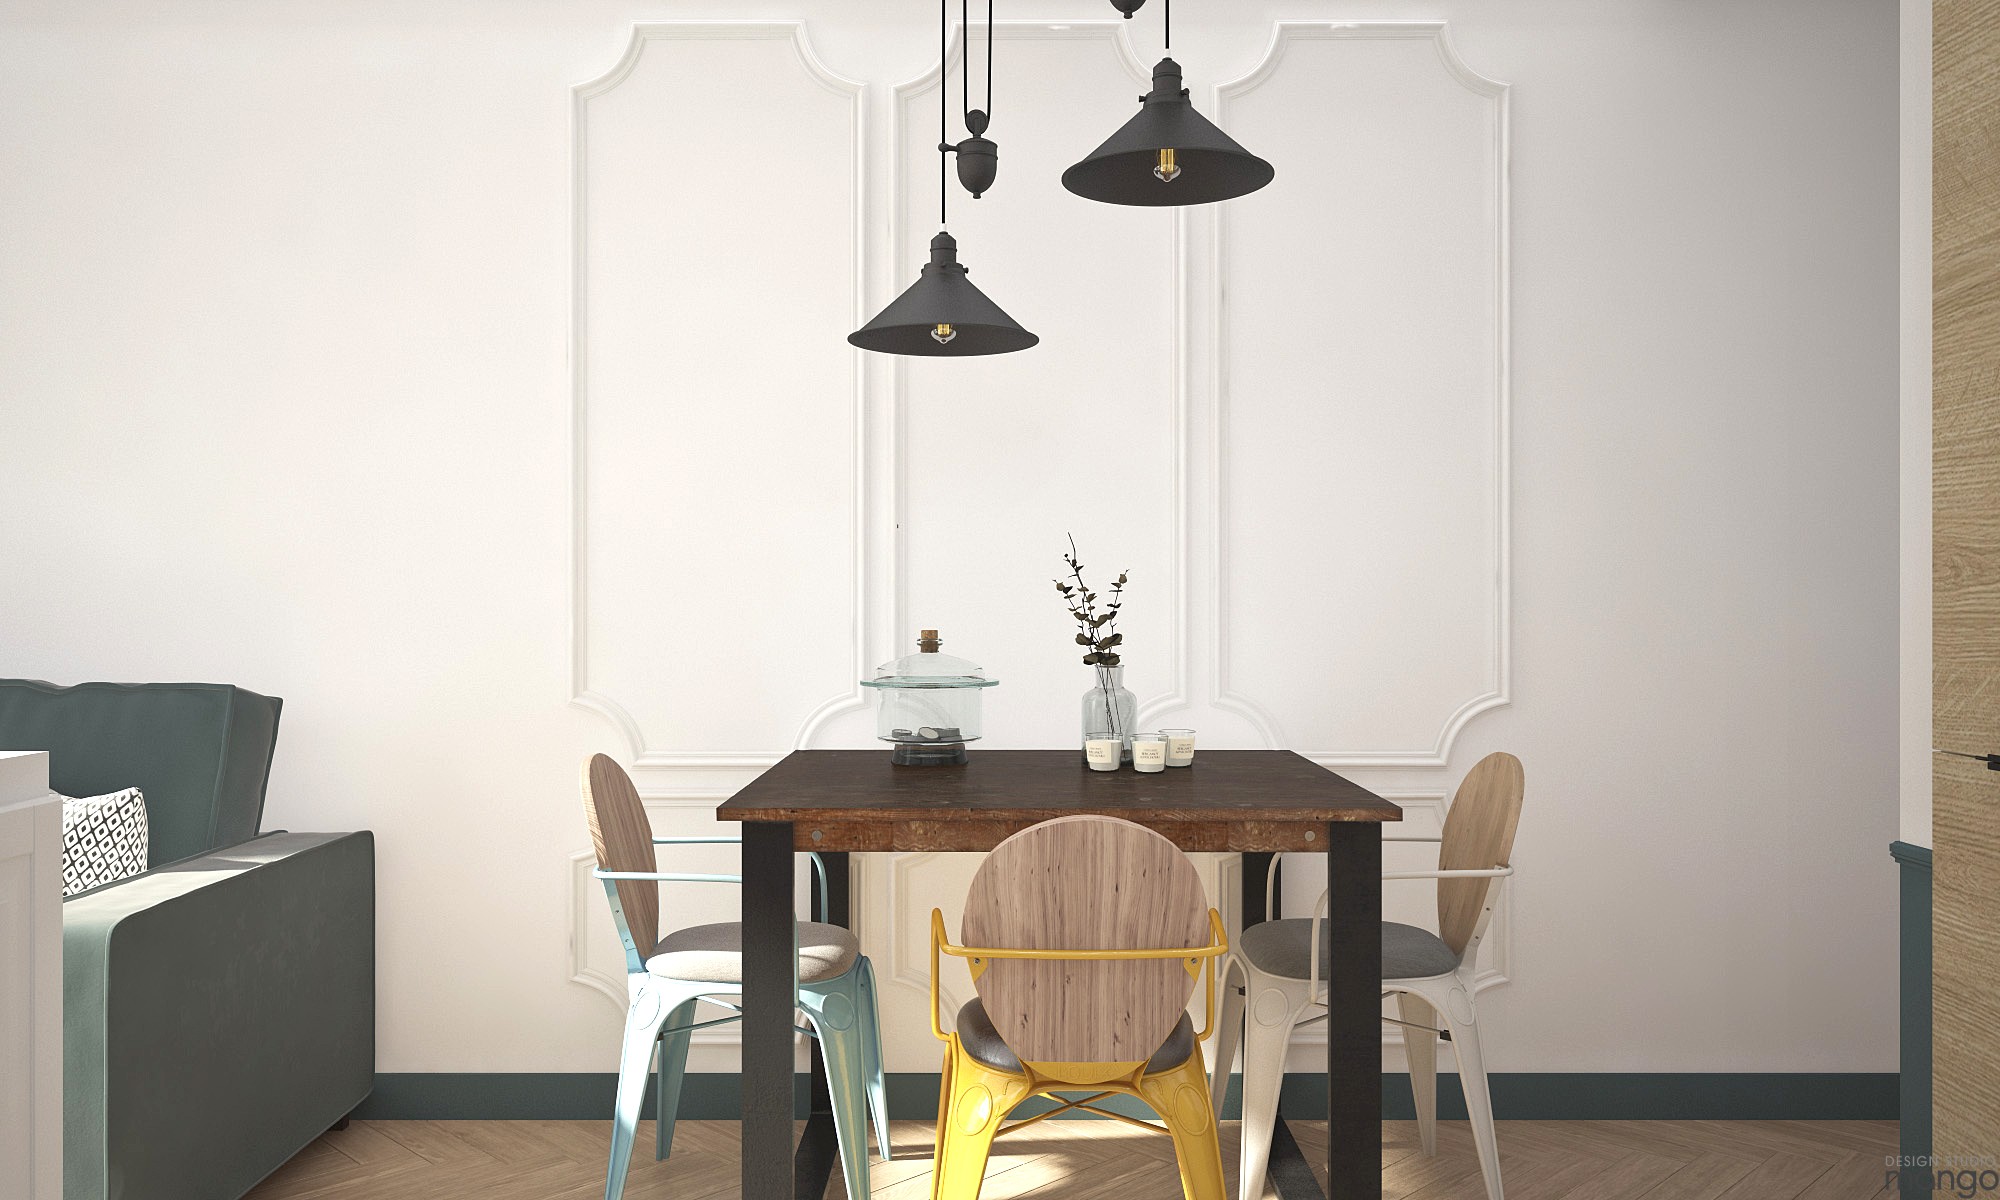 Inspiration To Decor Small Dining Room Designs With a Modern and ...